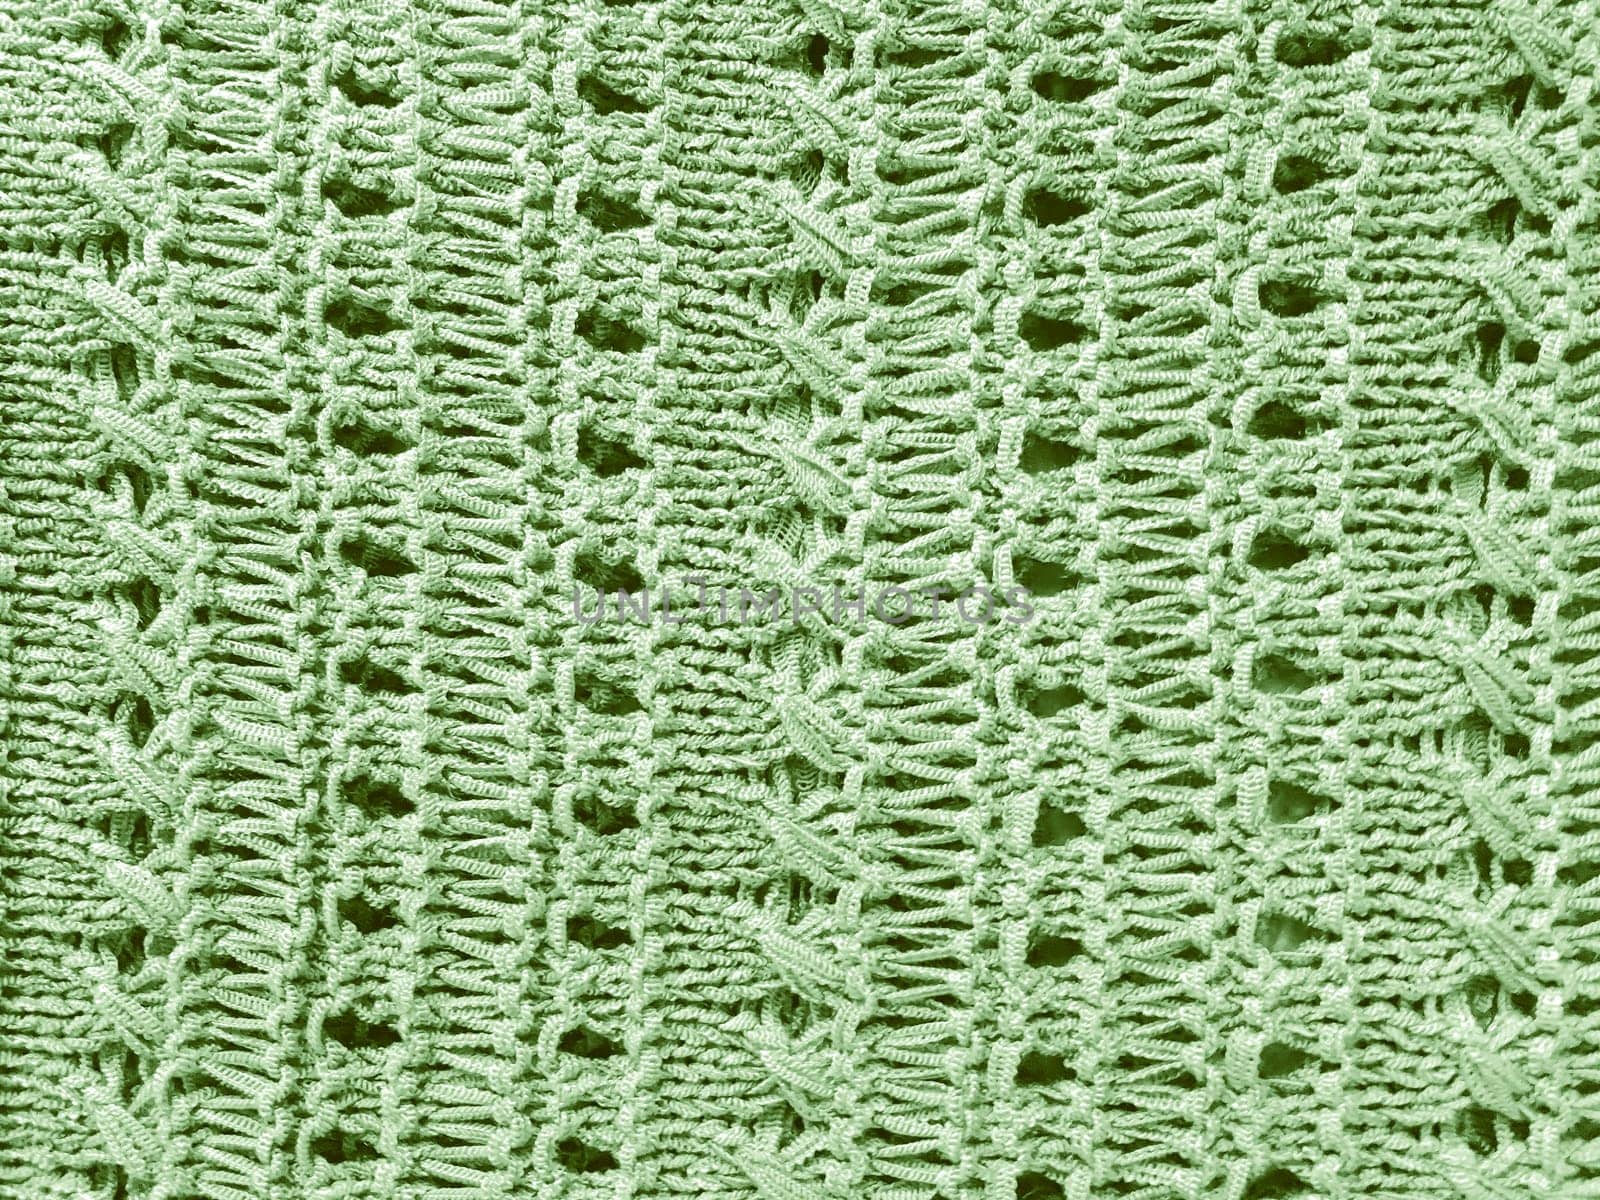 Jacquard Knitting. Nordic Soft Garment. Vintage Detail Thread. Organic Knitwear Canvas. Texture Knitted Fabric. Christmas Wool Pullover. Handmade Cotton Background. Woven Fabrics.